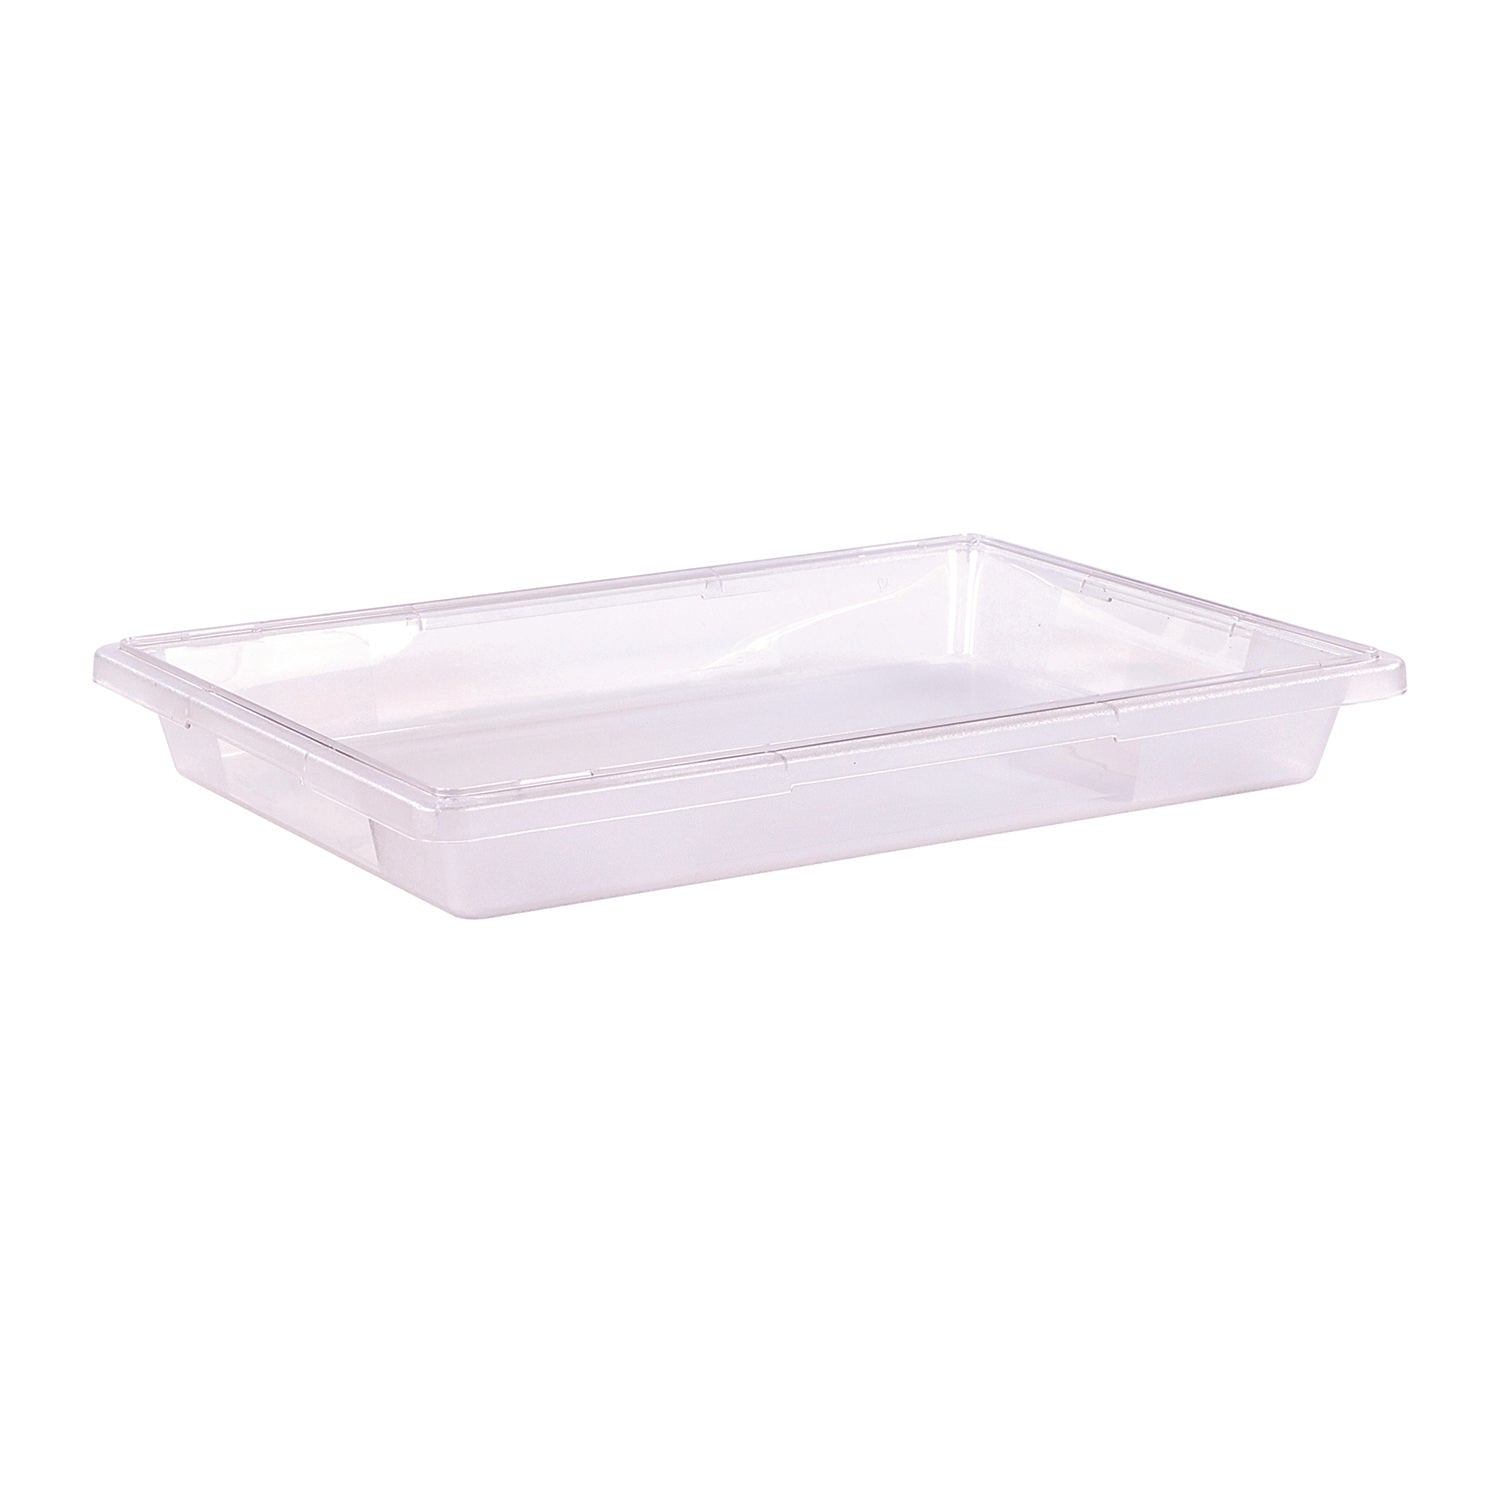 storplus-polycarbonate-food-storage-container-5-gal-18-x-26-x-35-clear-plastic_cfs1062007 - 1